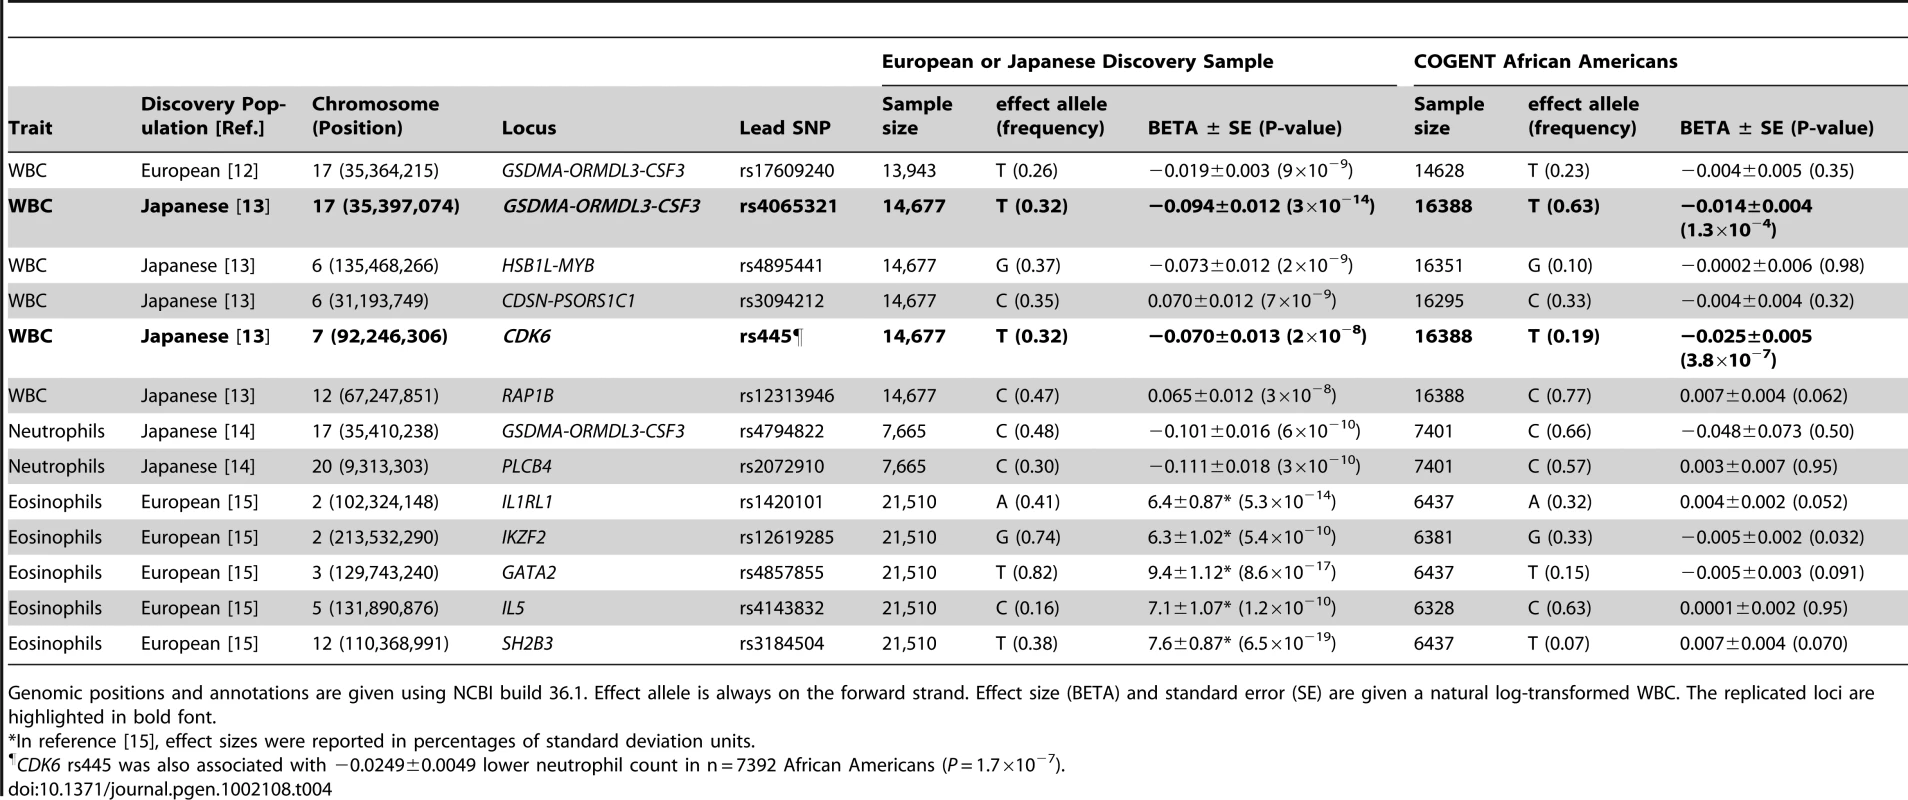 Assessment in African-Americans of loci previously associated with leukocyte traits in Caucasians and/or Japanese.